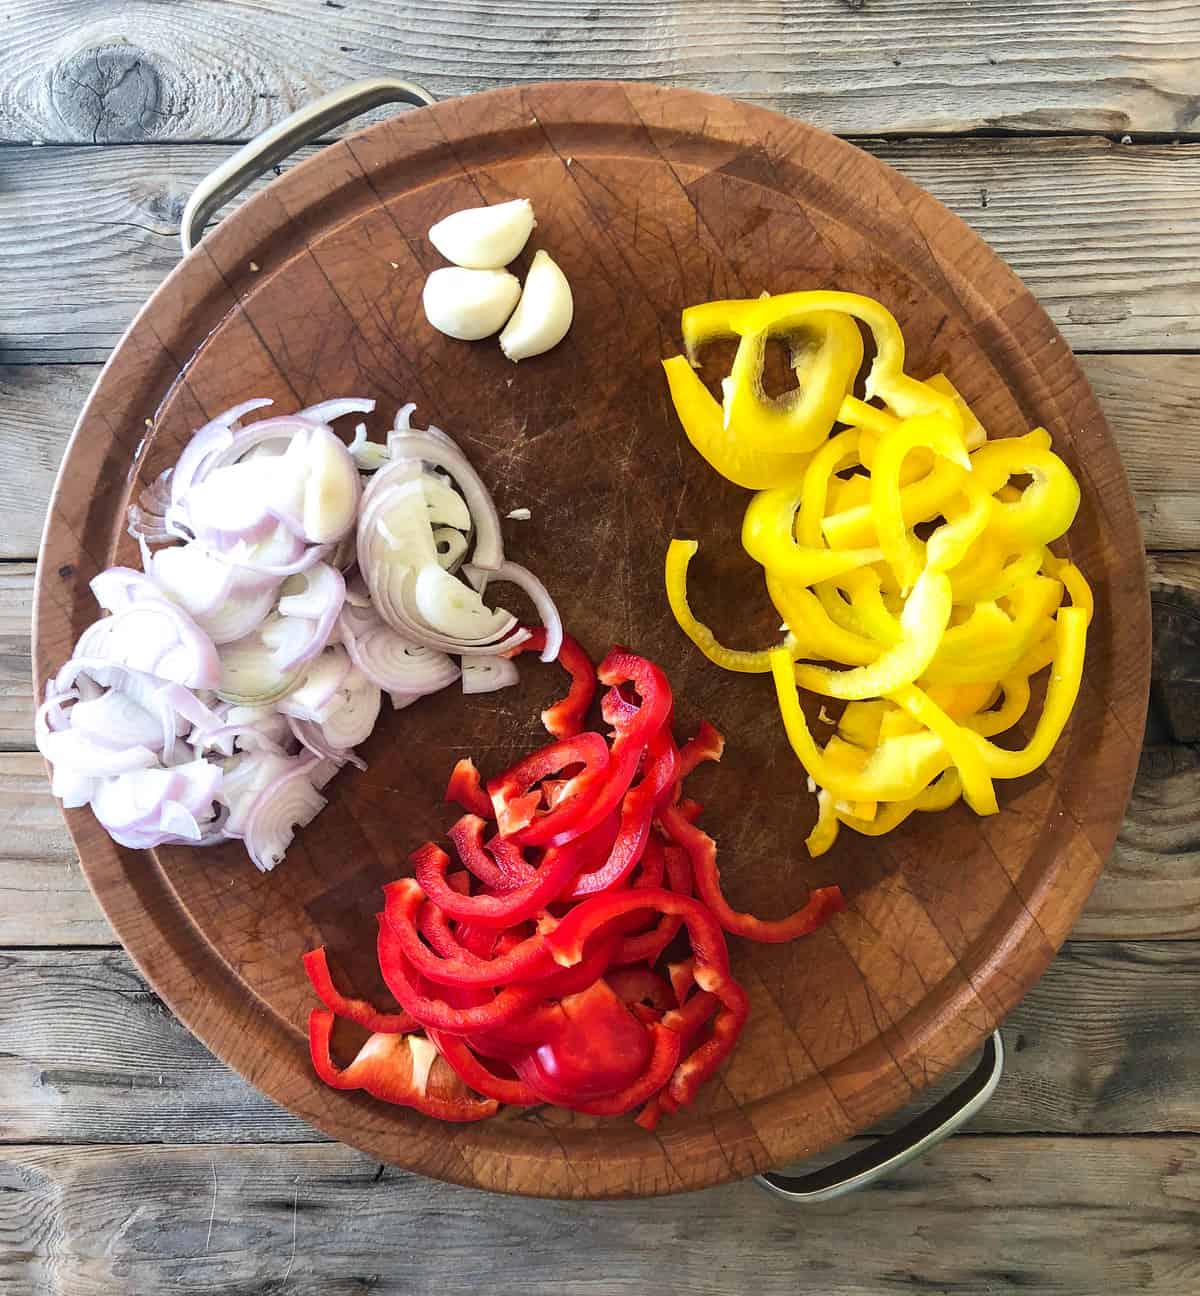 Chopped bell pepper, onion, and garlic